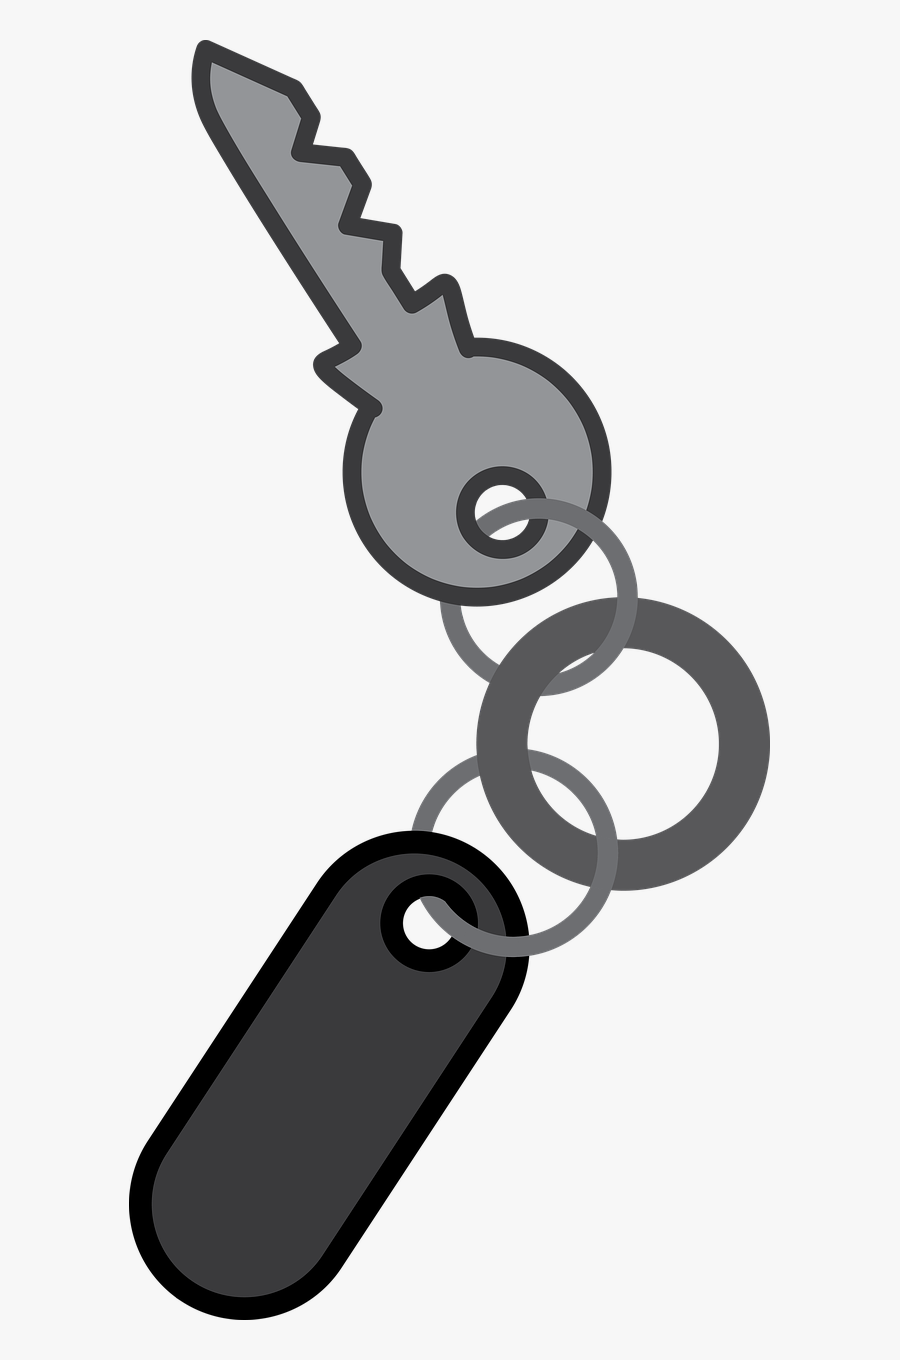 Keys Keychain House Free Picture - Key Chain Clipart Black And White, Transparent Clipart